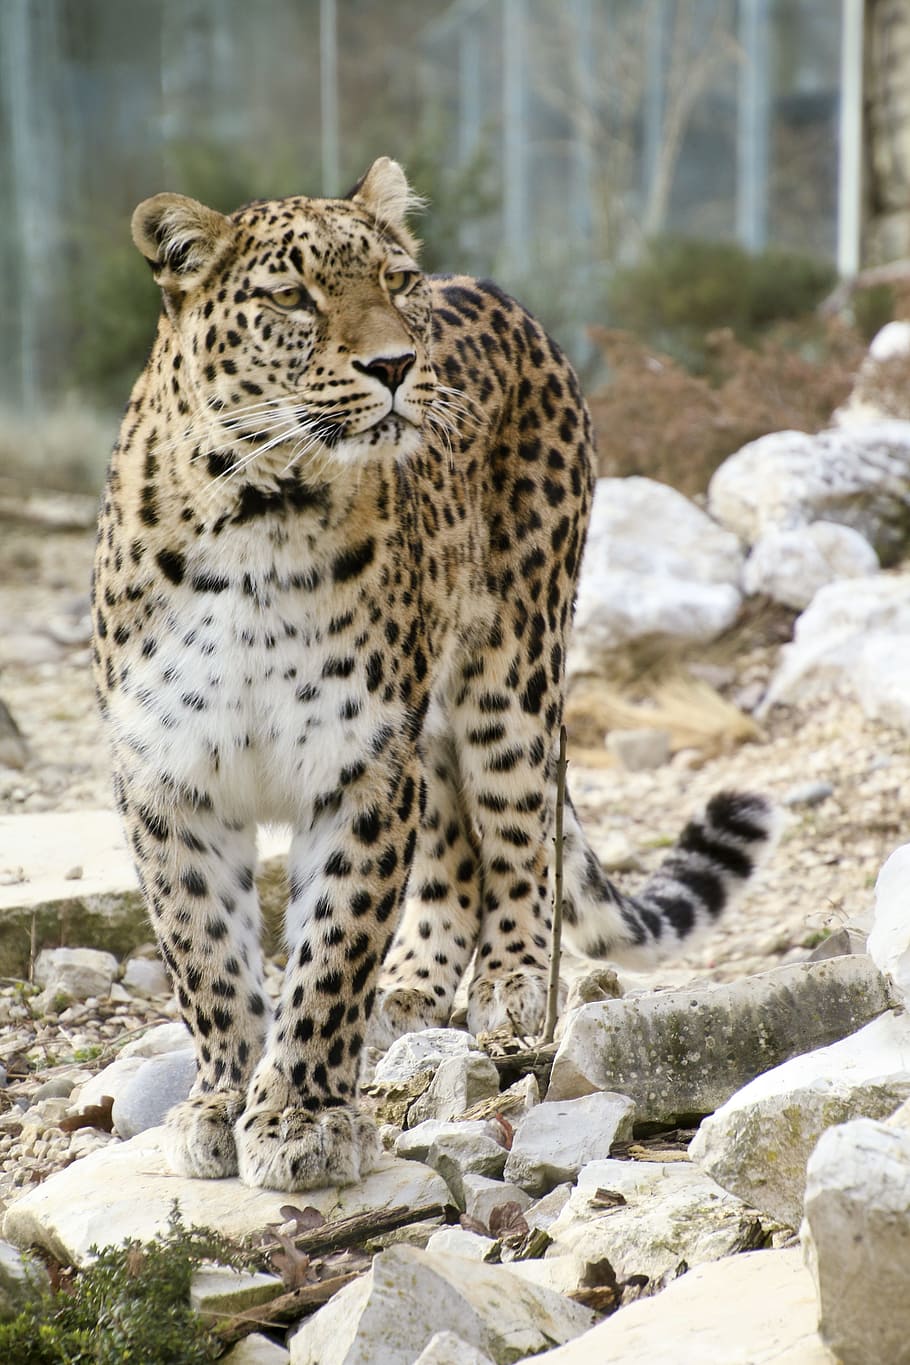 leopard on rocky surface during daytime, persian leopard, full length portrait